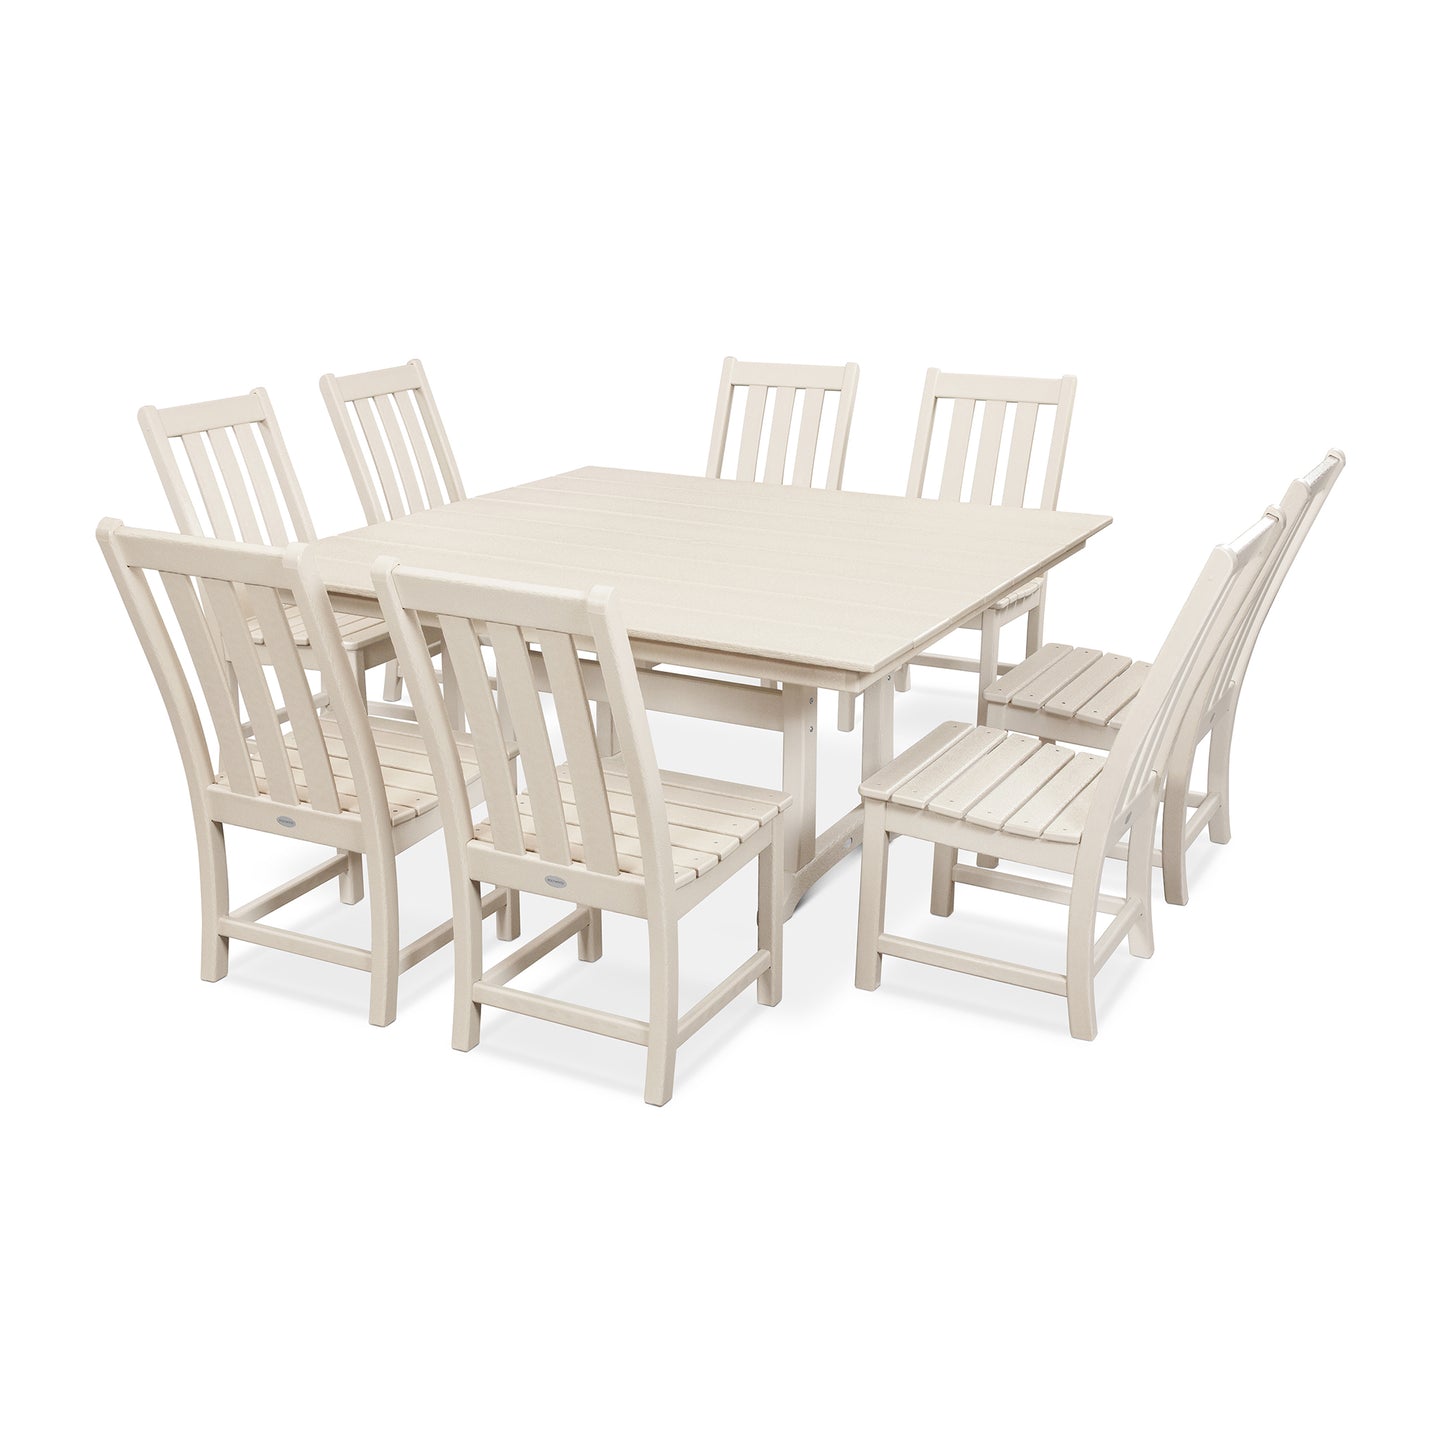 A modern POLYWOOD® Vineyard 9-Piece Farmhouse Trestle Dining Set featuring a rectangular table and six matching chairs, all in white, arranged on a plain white background. The furniture has a sleek, minimalist design.